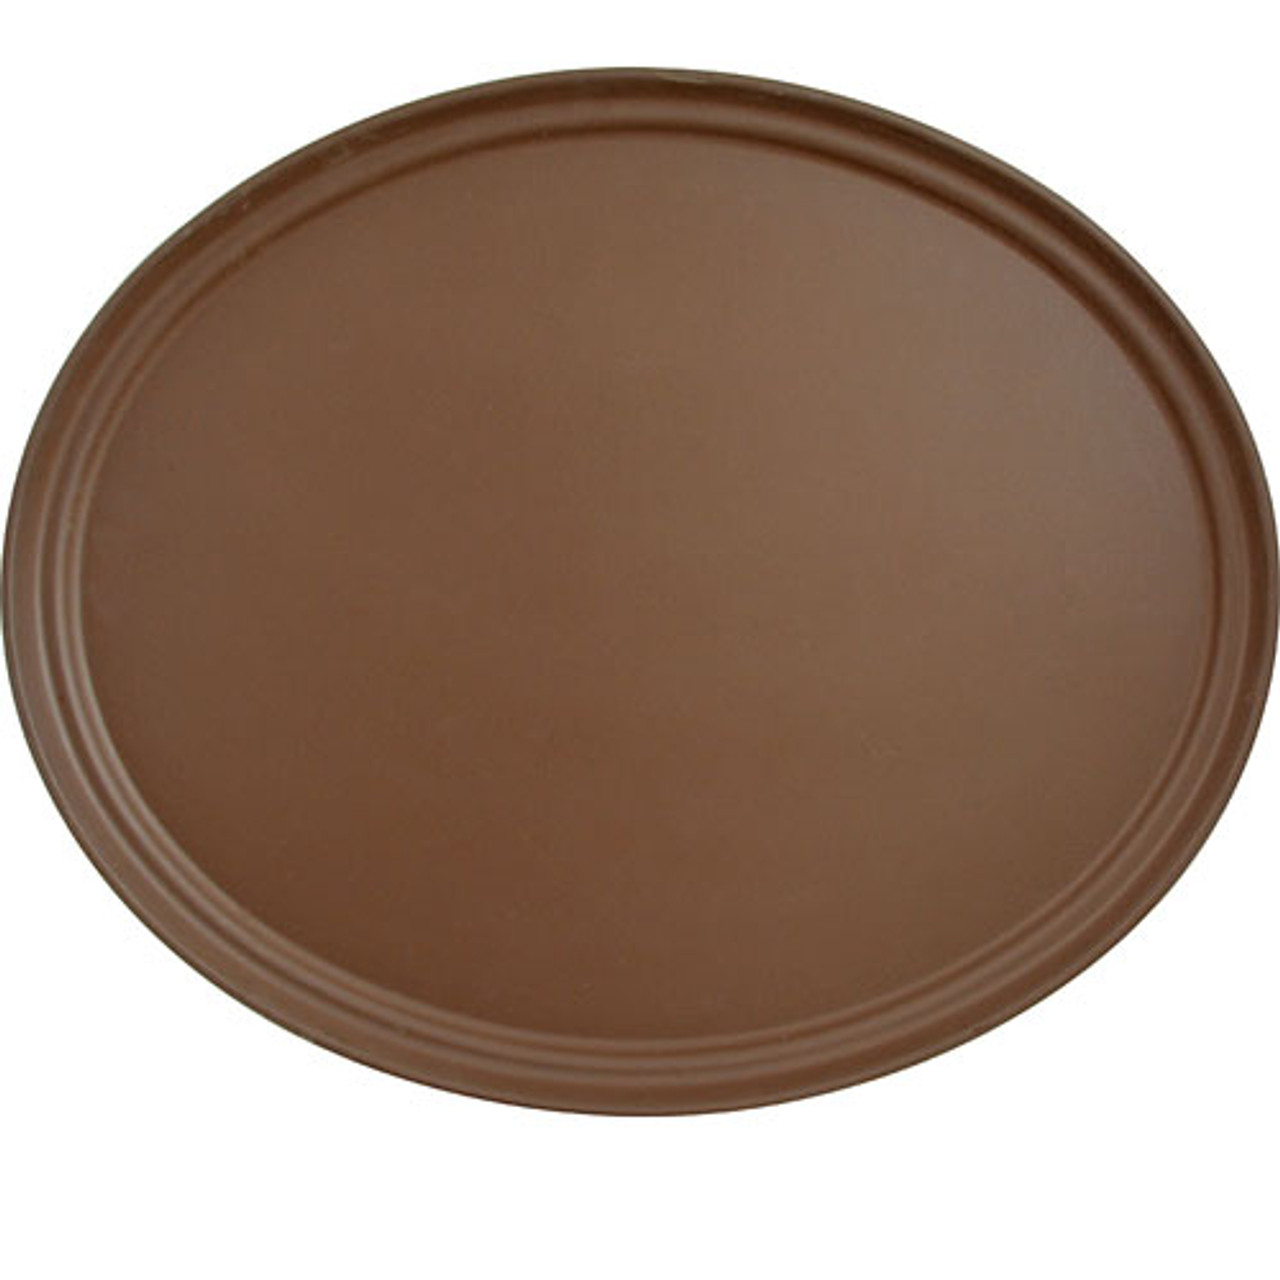 Tray , 22 X 26-7/8" Oval, Tan - Replacement Part For Cambro CAM2700CT138